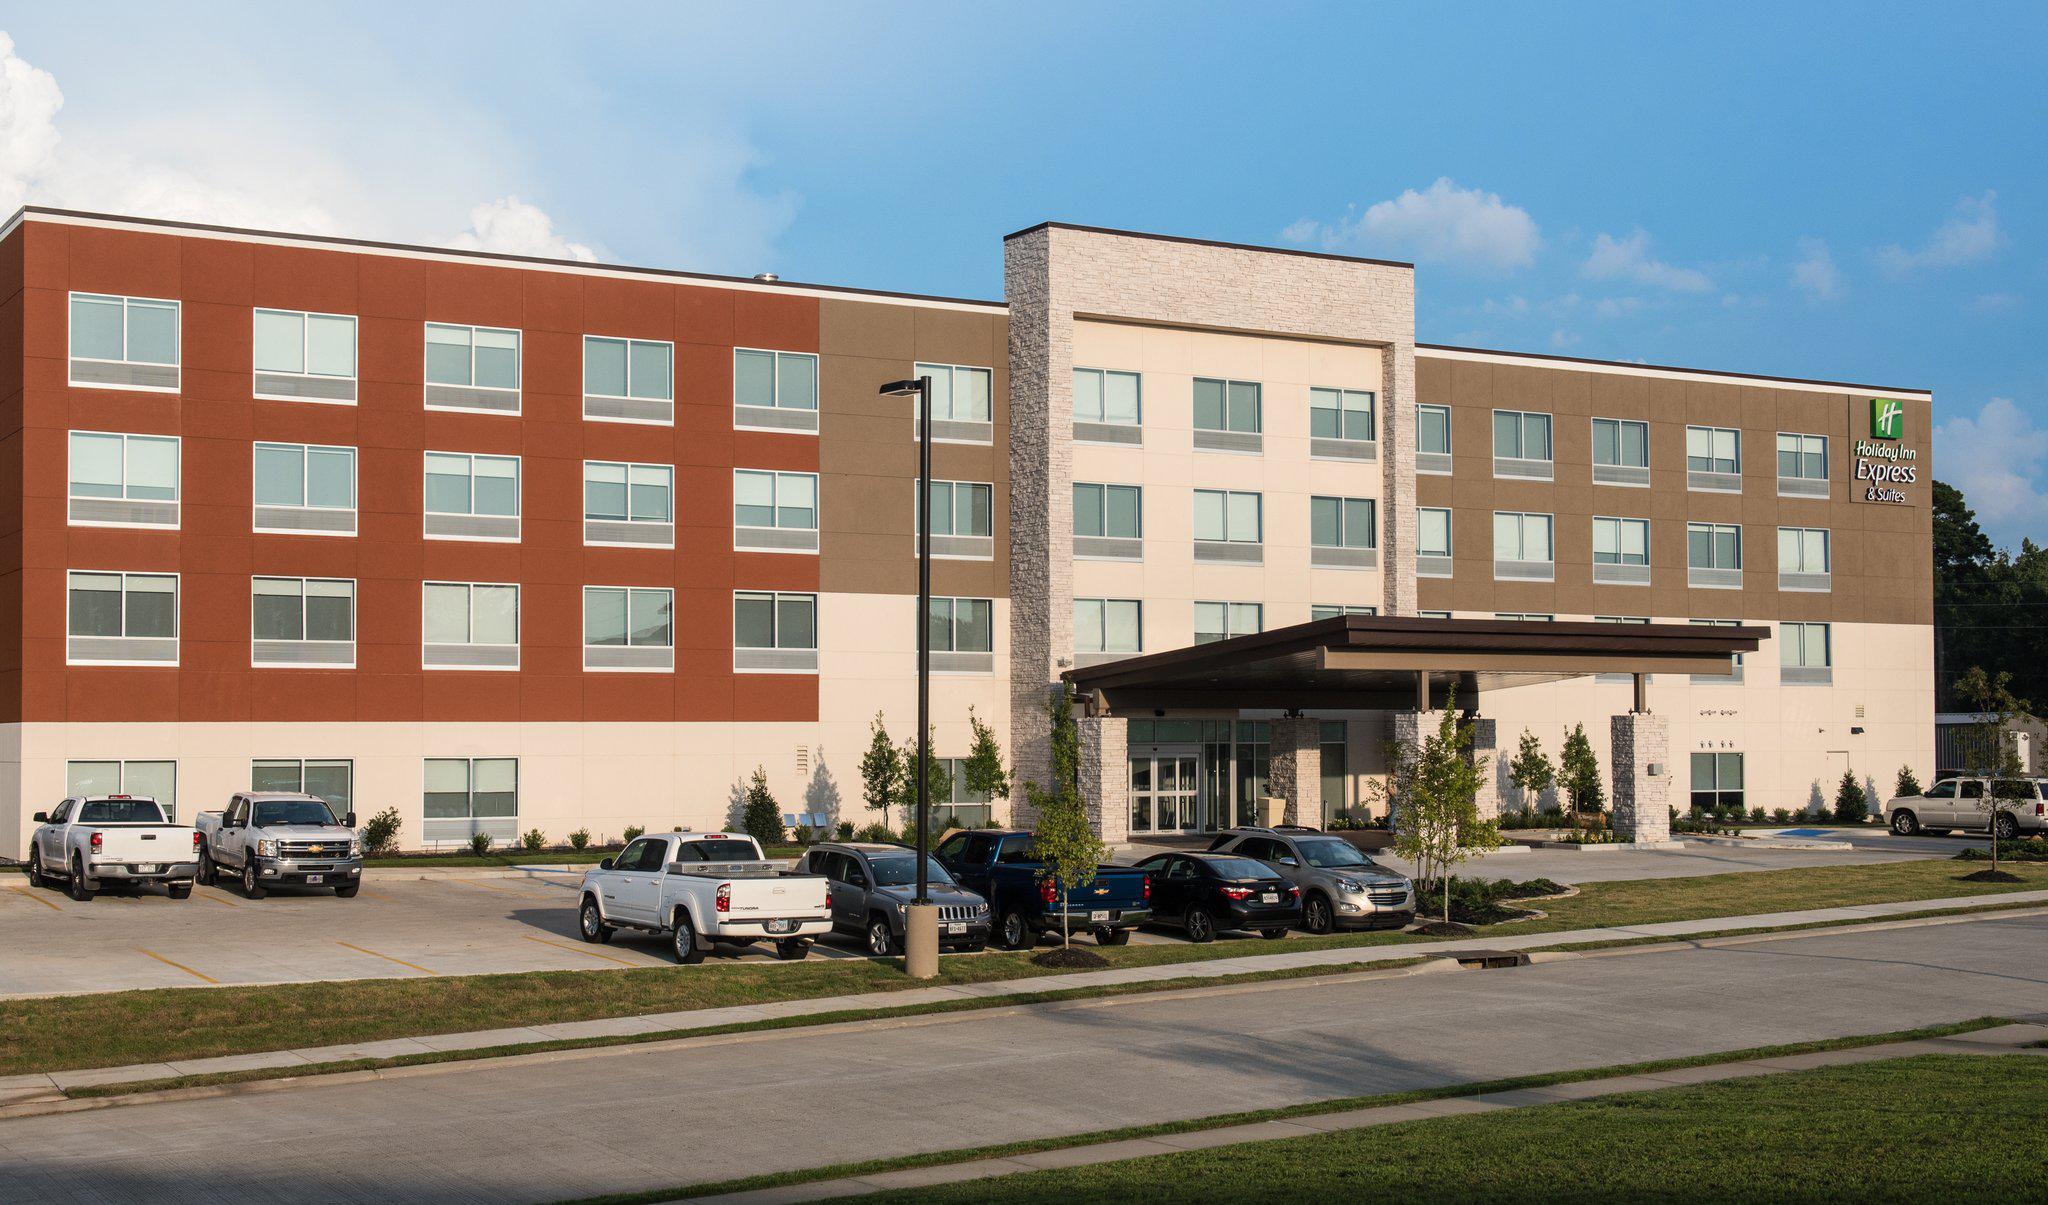 Holiday Inn Express & Suites Ruston Photo